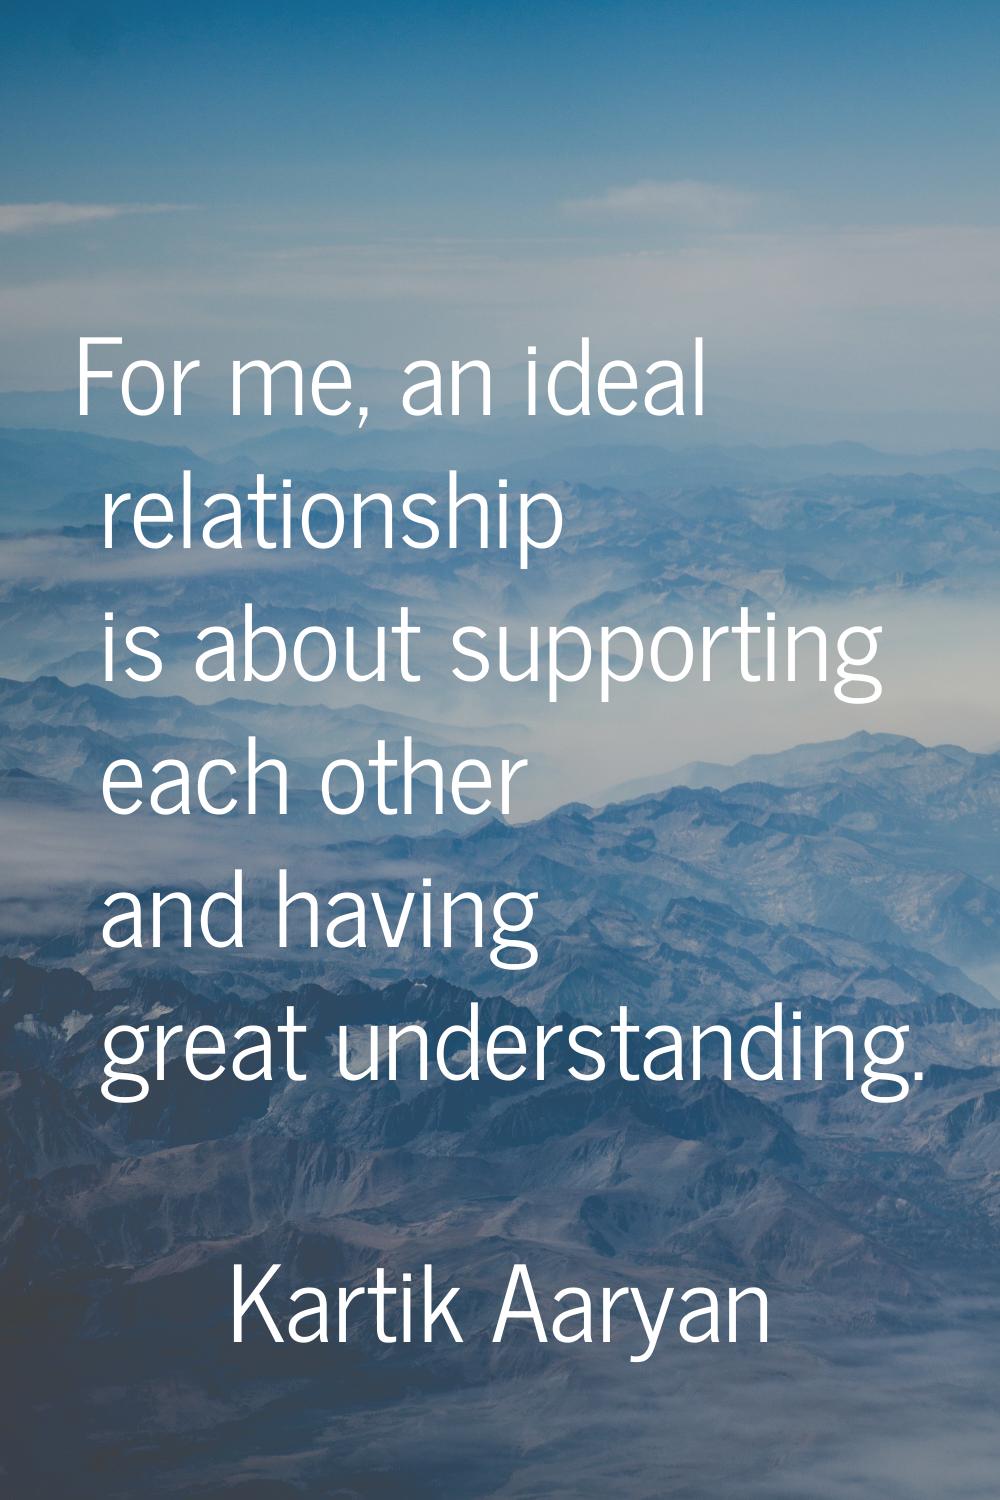 For me, an ideal relationship is about supporting each other and having great understanding.